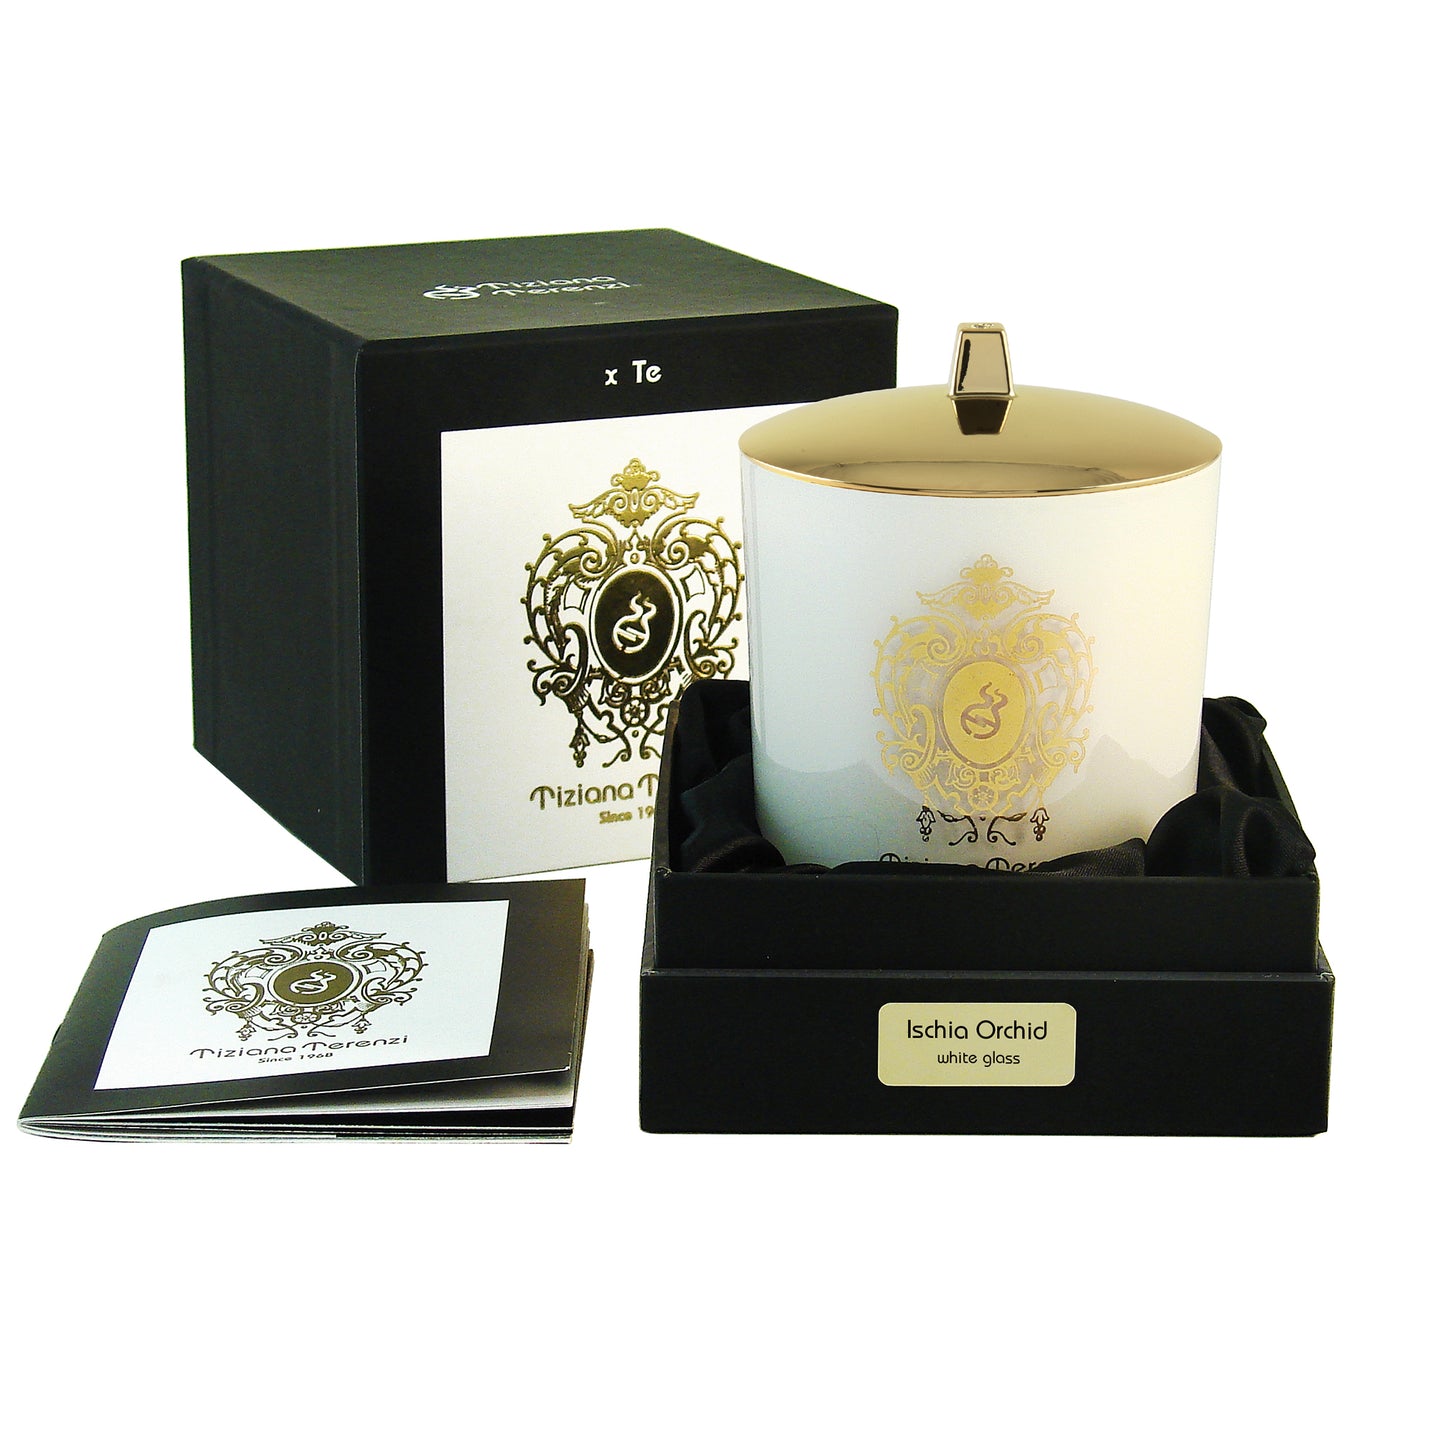 Ischia Orchid Candle, white glass, 1 wood wick - 6 oz.